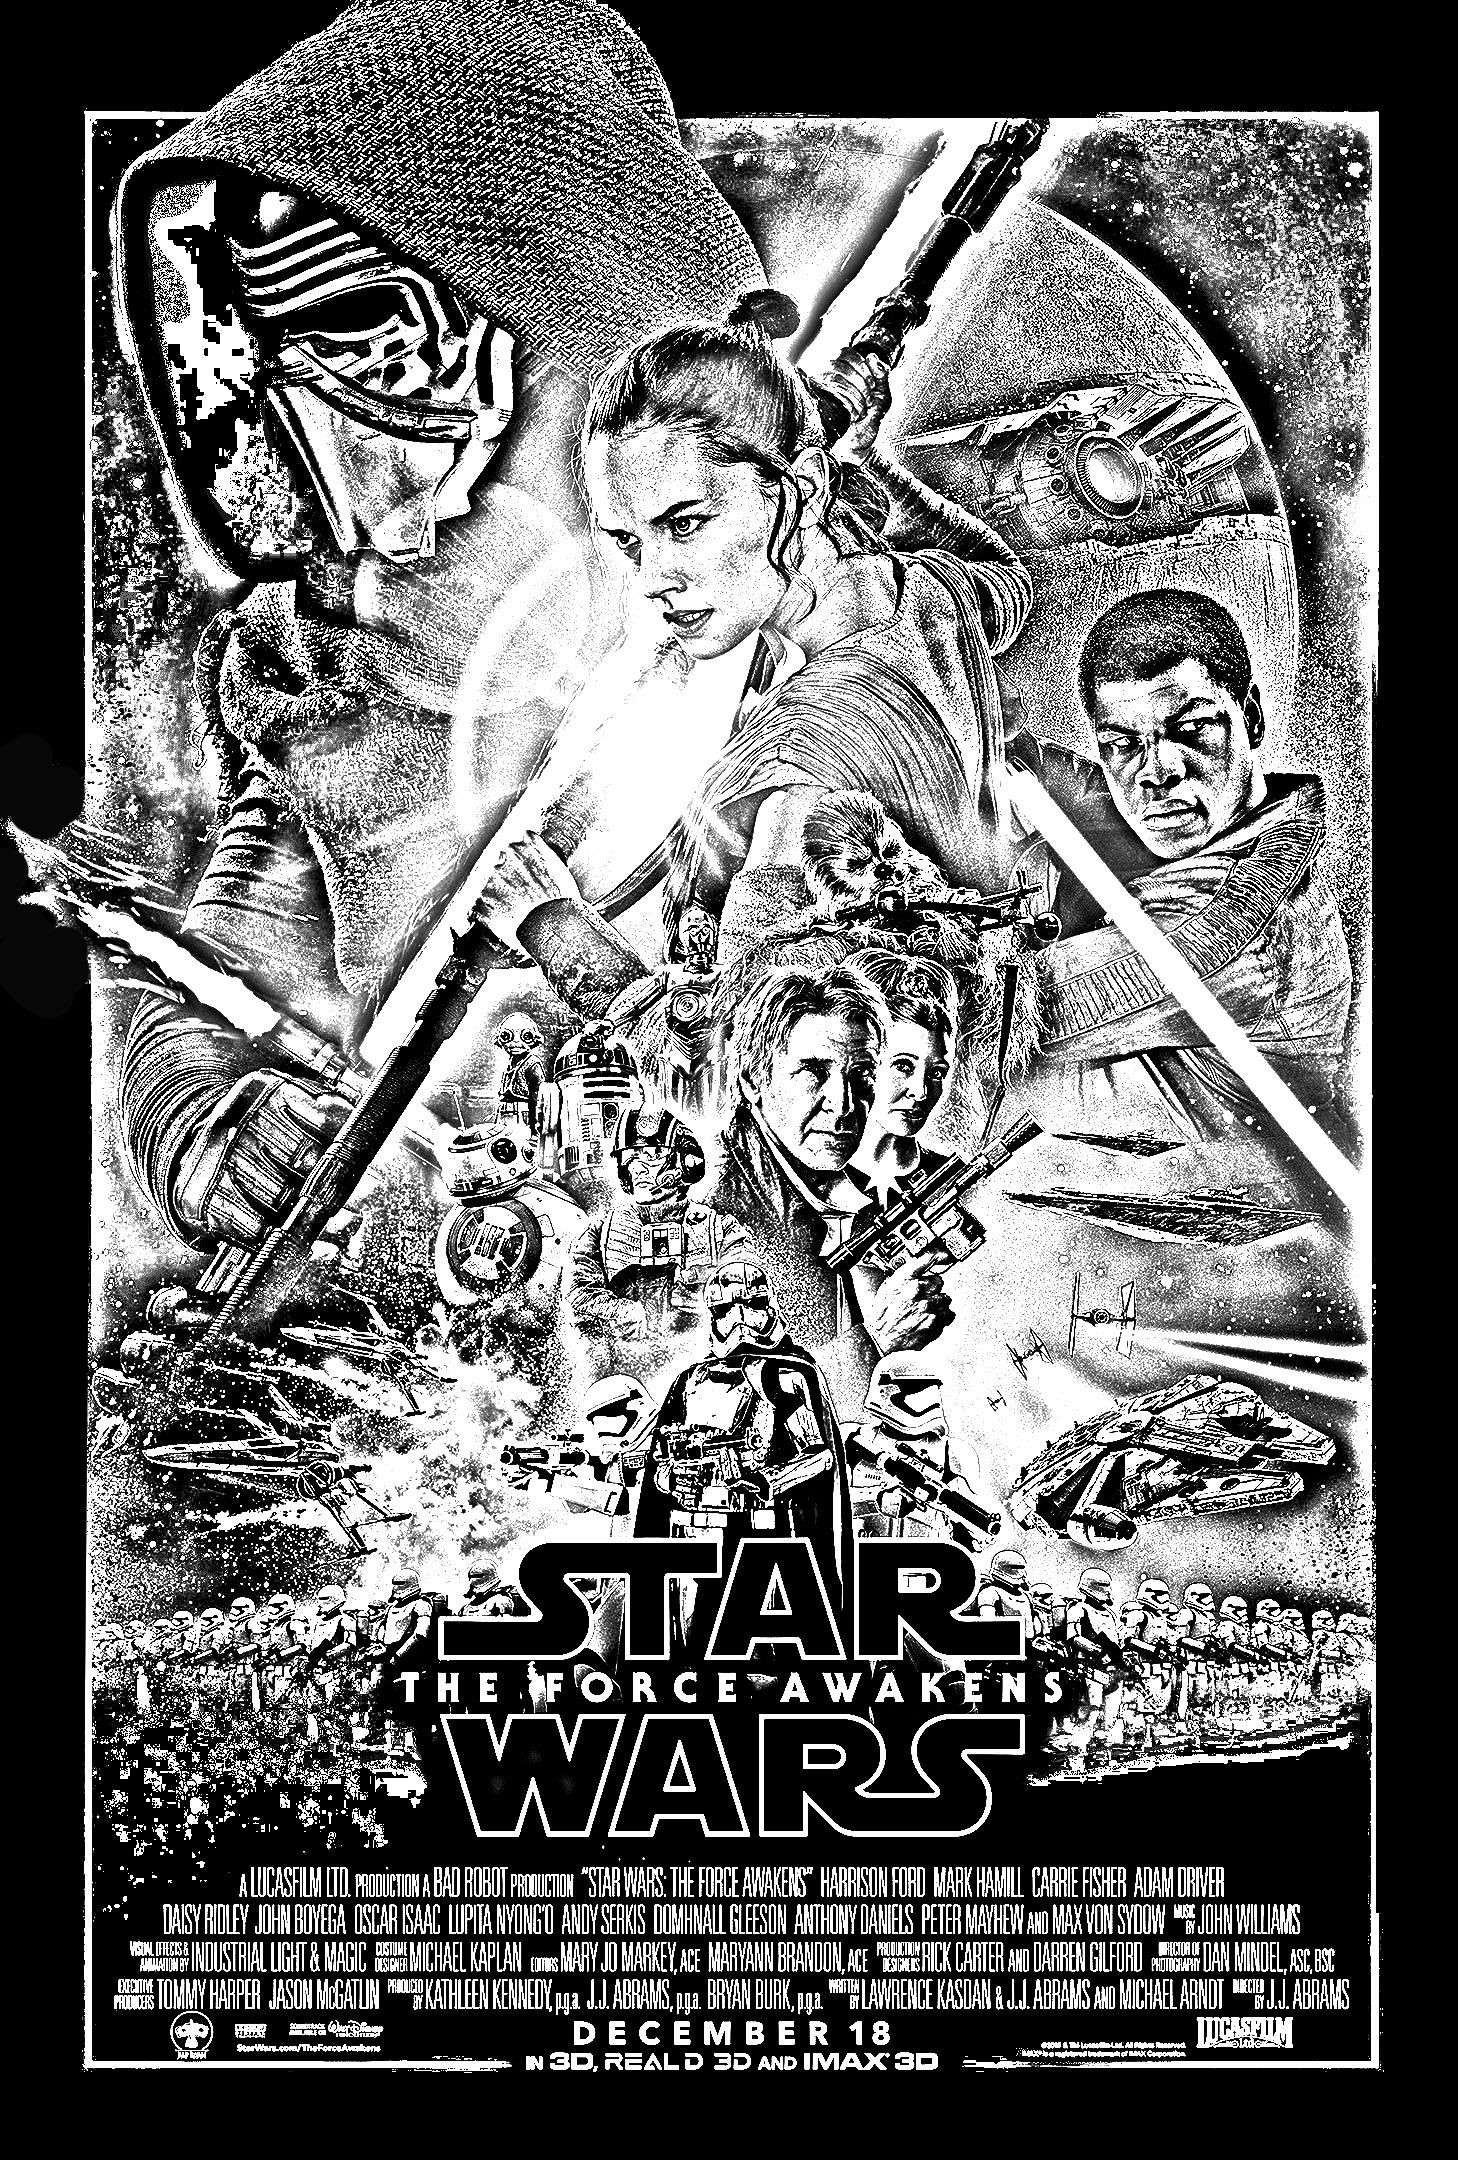 Star Wars Adult Coloring Book
 Free coloring page coloring adult star wars the force